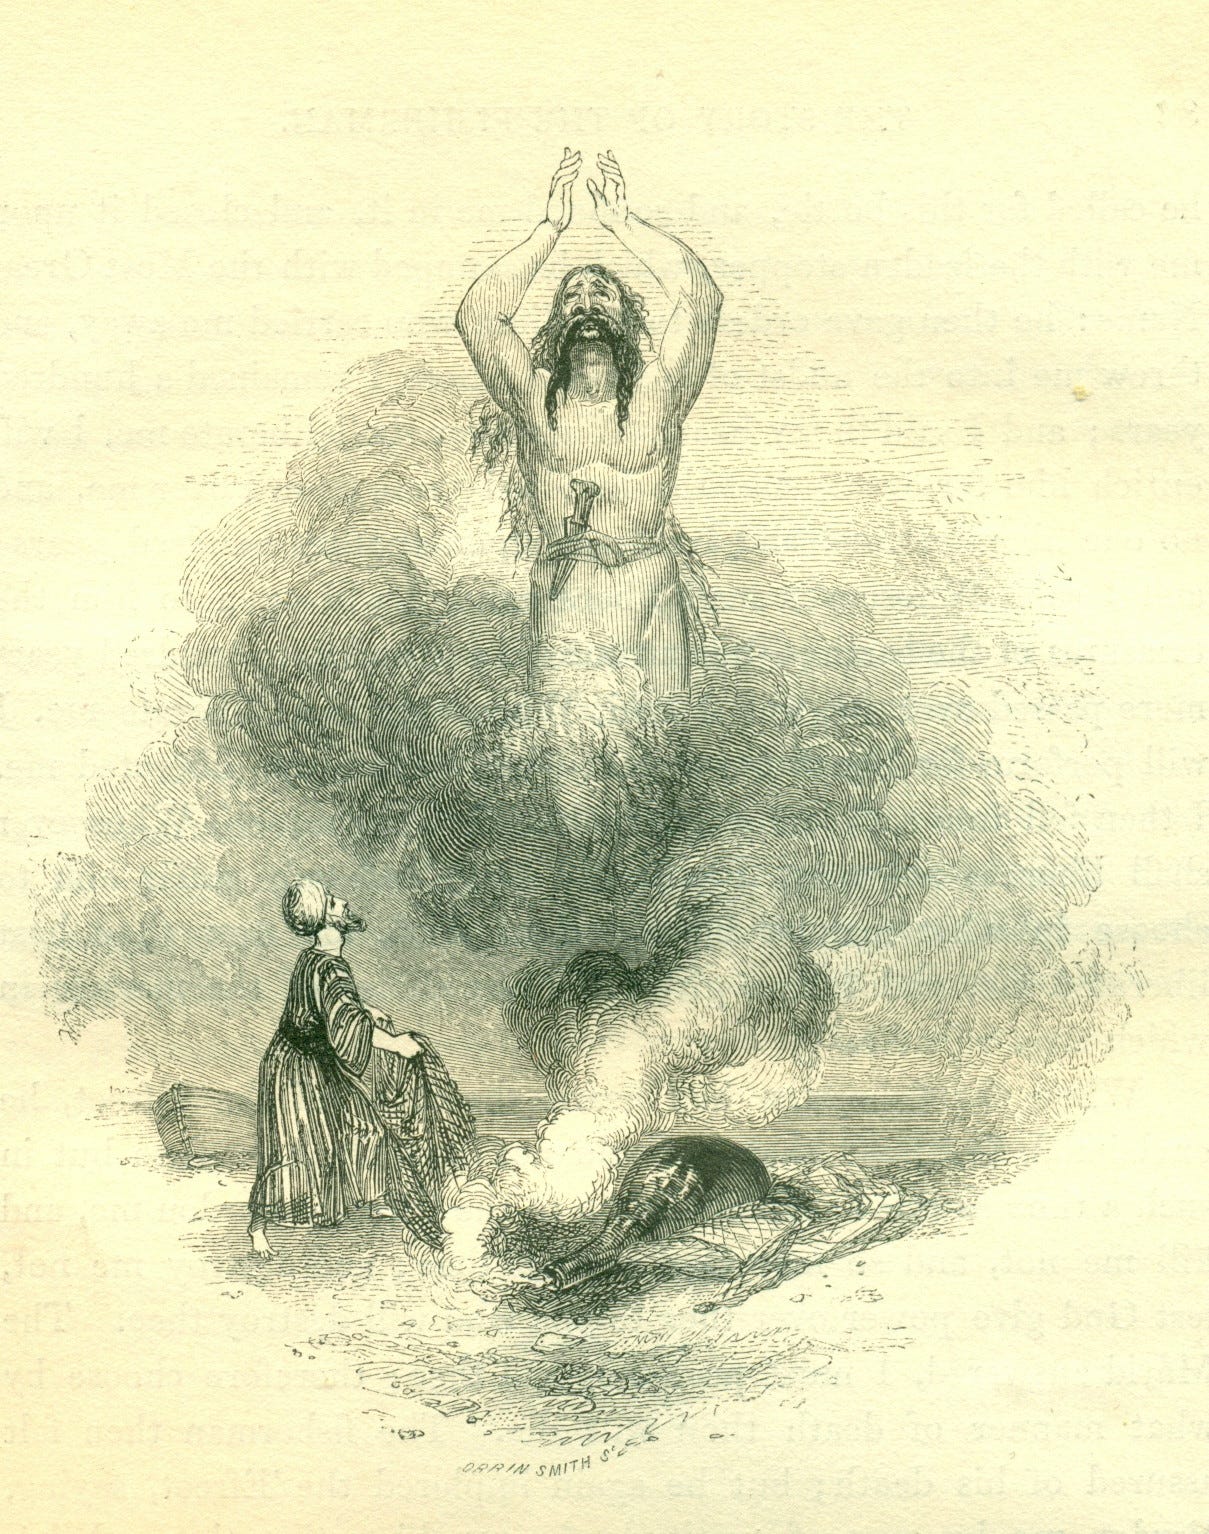 This is a print of a wood engraving. There is a large, very awe inspiring genie arising from smoke spilled from a bottle lying on its side on the ground. The genie has a sword in its sheath and is raising its arms to the sky. A small man in a striped robe, beard and turban looks up in awe at the genie, clutching a piece of cloth in his hands. There is a faint line of a boat and sea in the background.